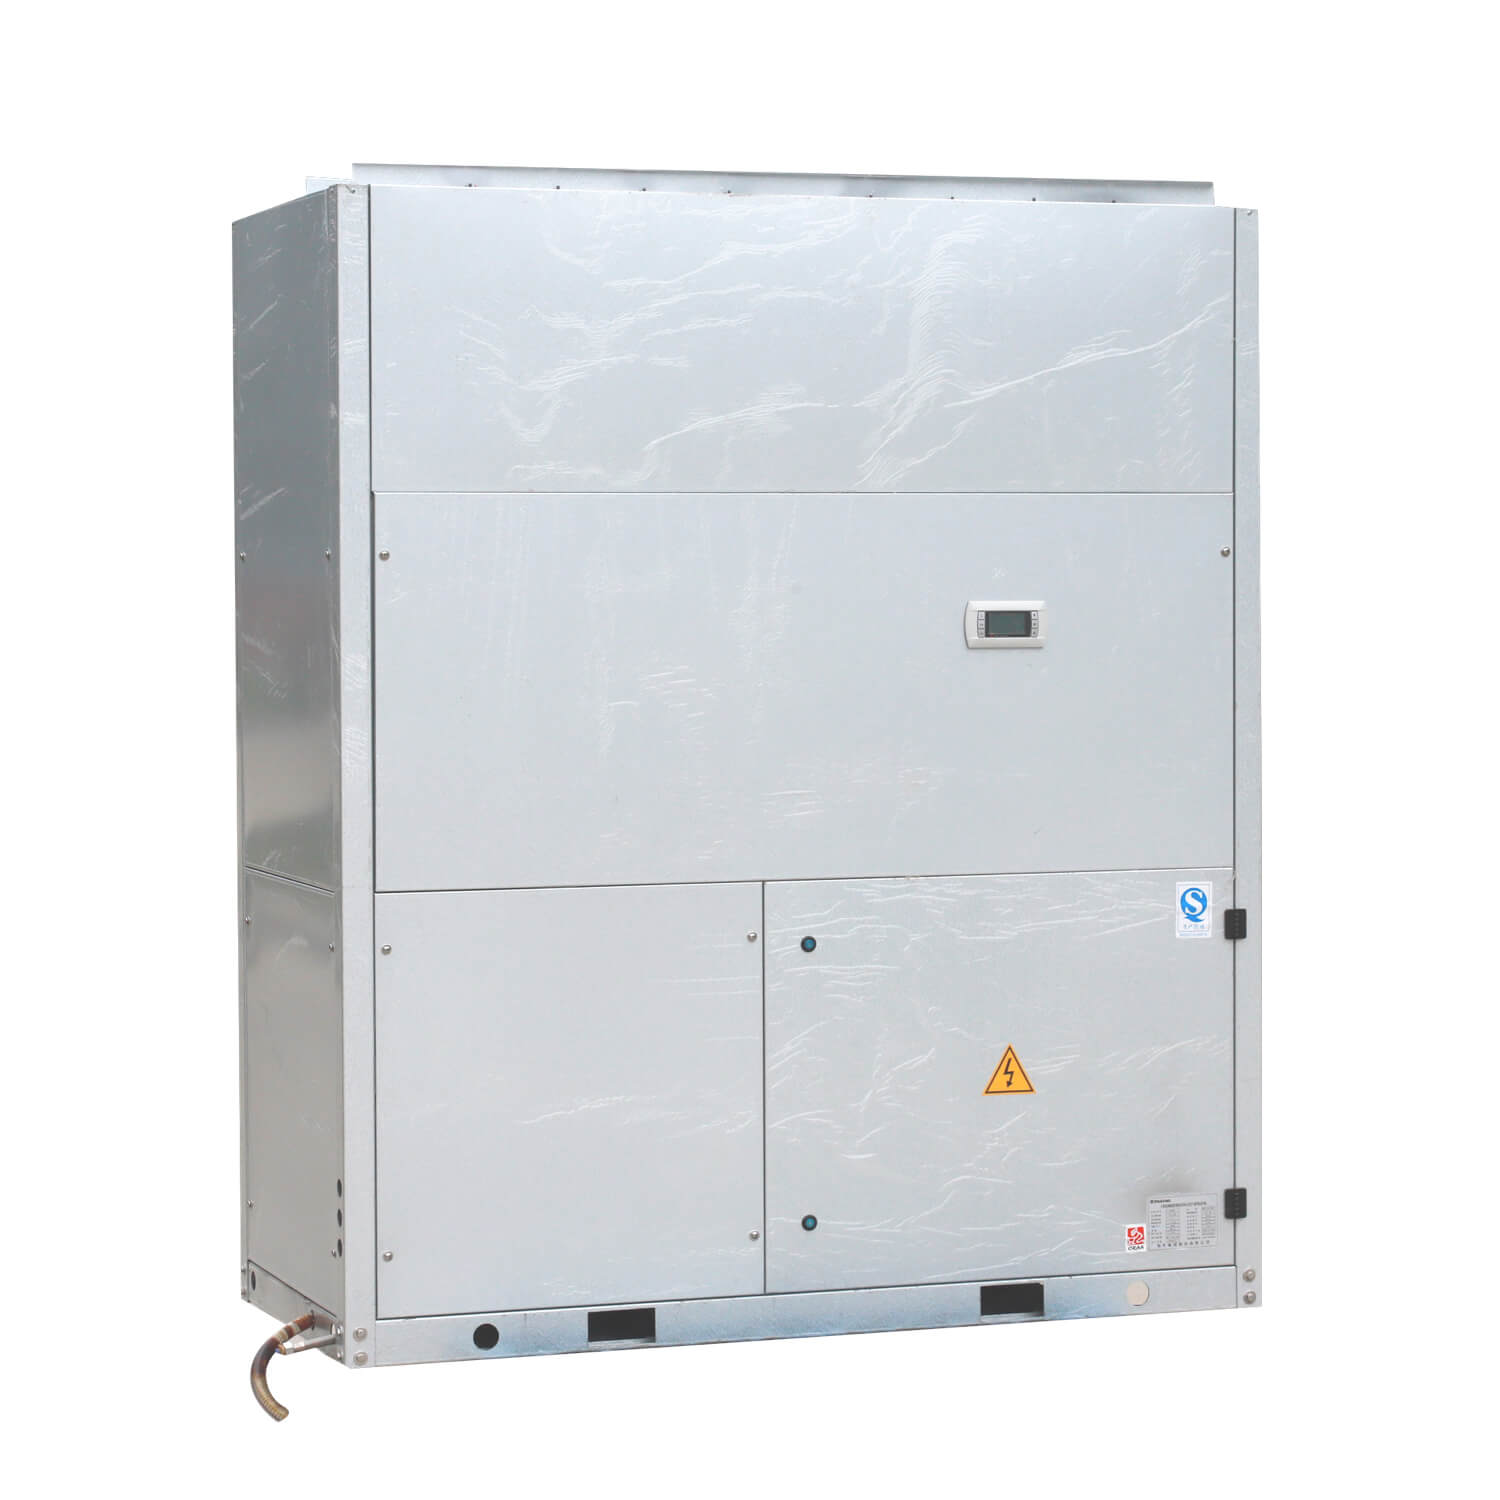 Cabinet type air conditioning unit